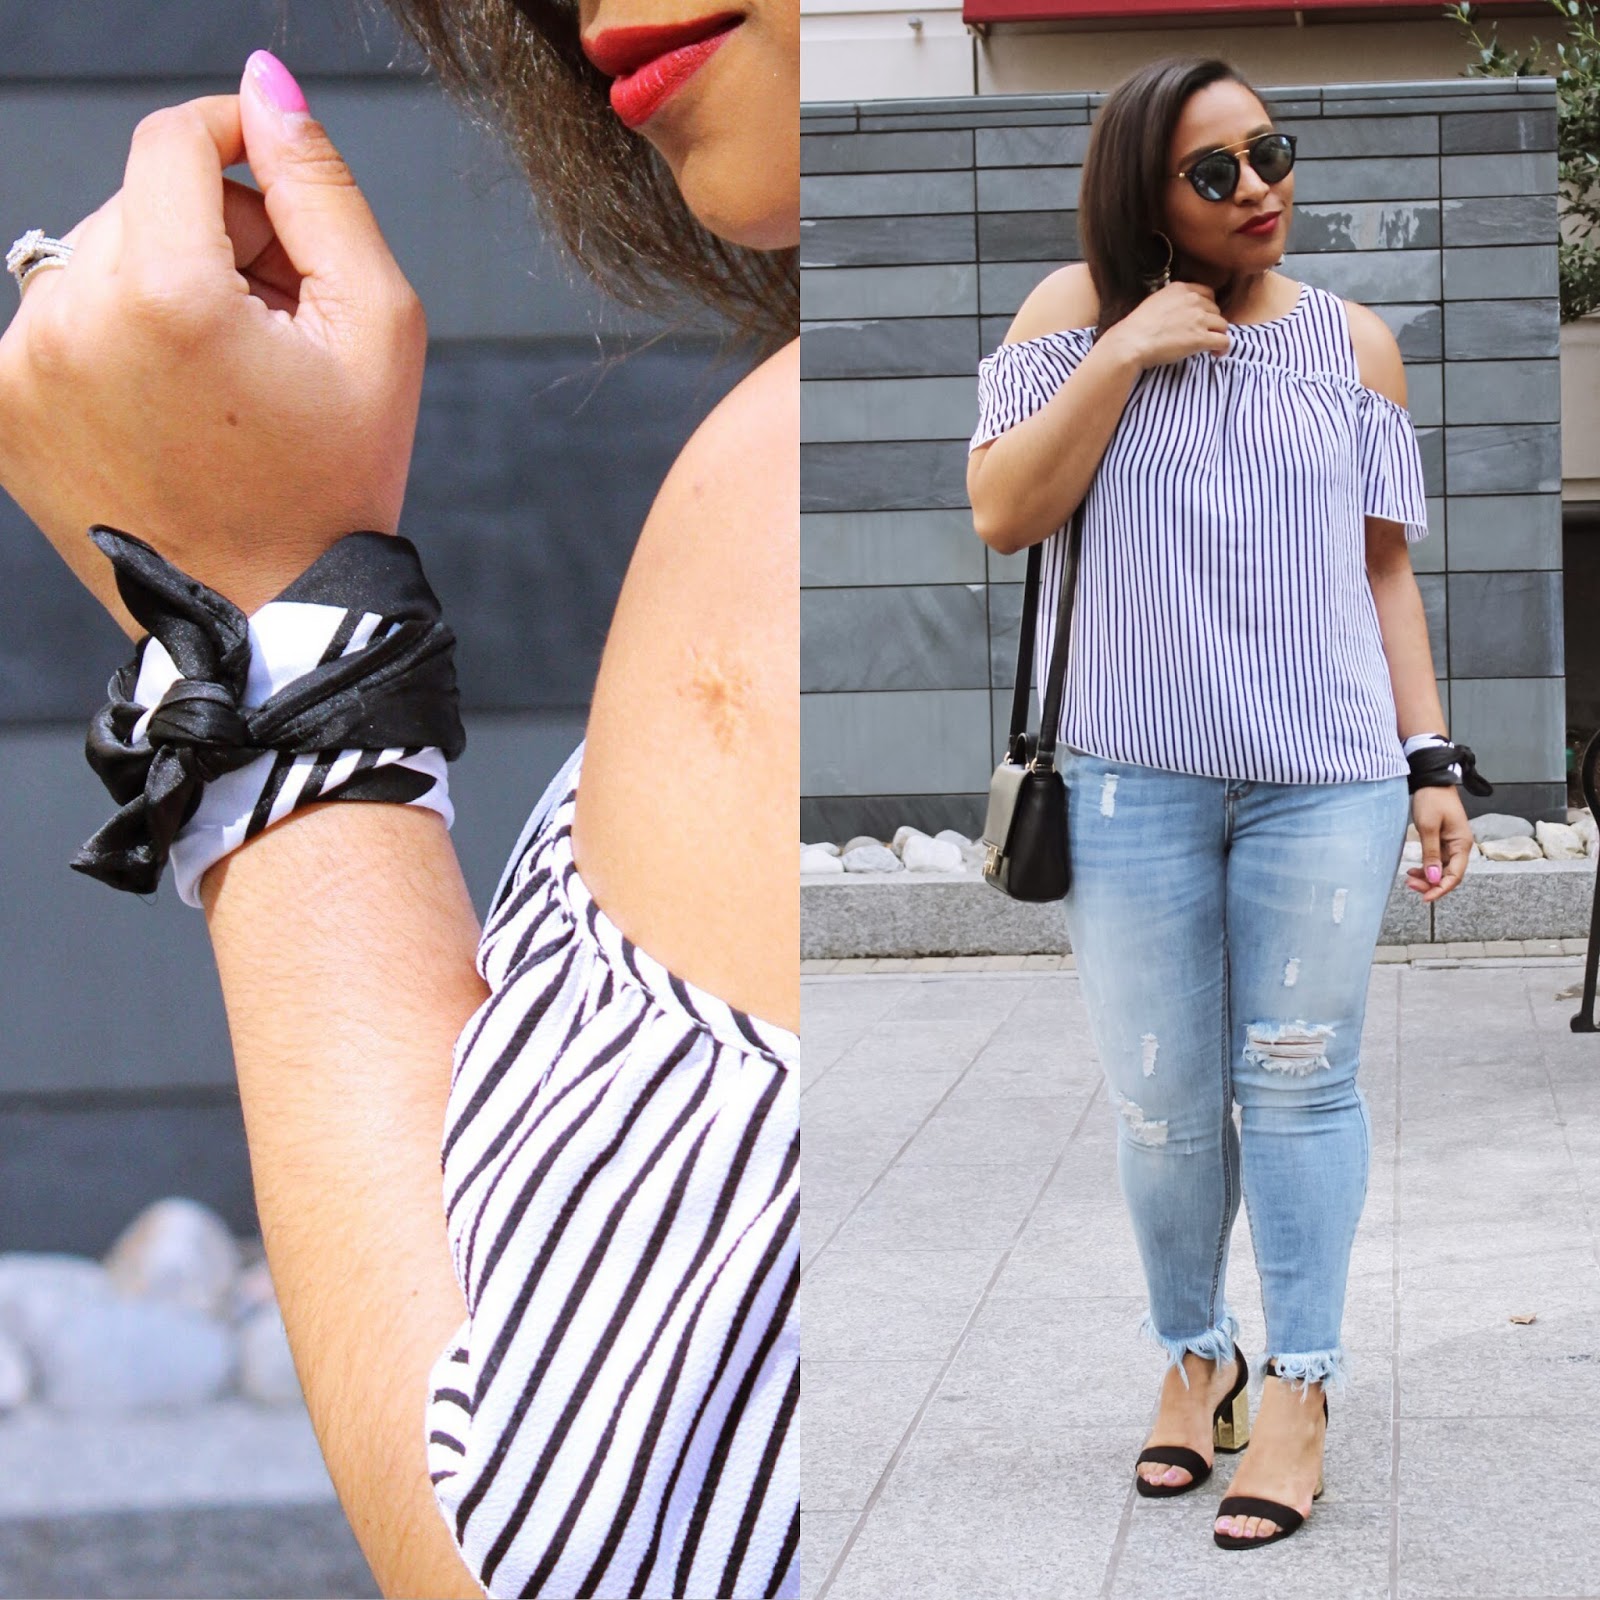 off the shoulder trend, off the shoulder top, stripes, blue, kapten and son sunglasses, block heels, trendy outfits, spring outfits, blue